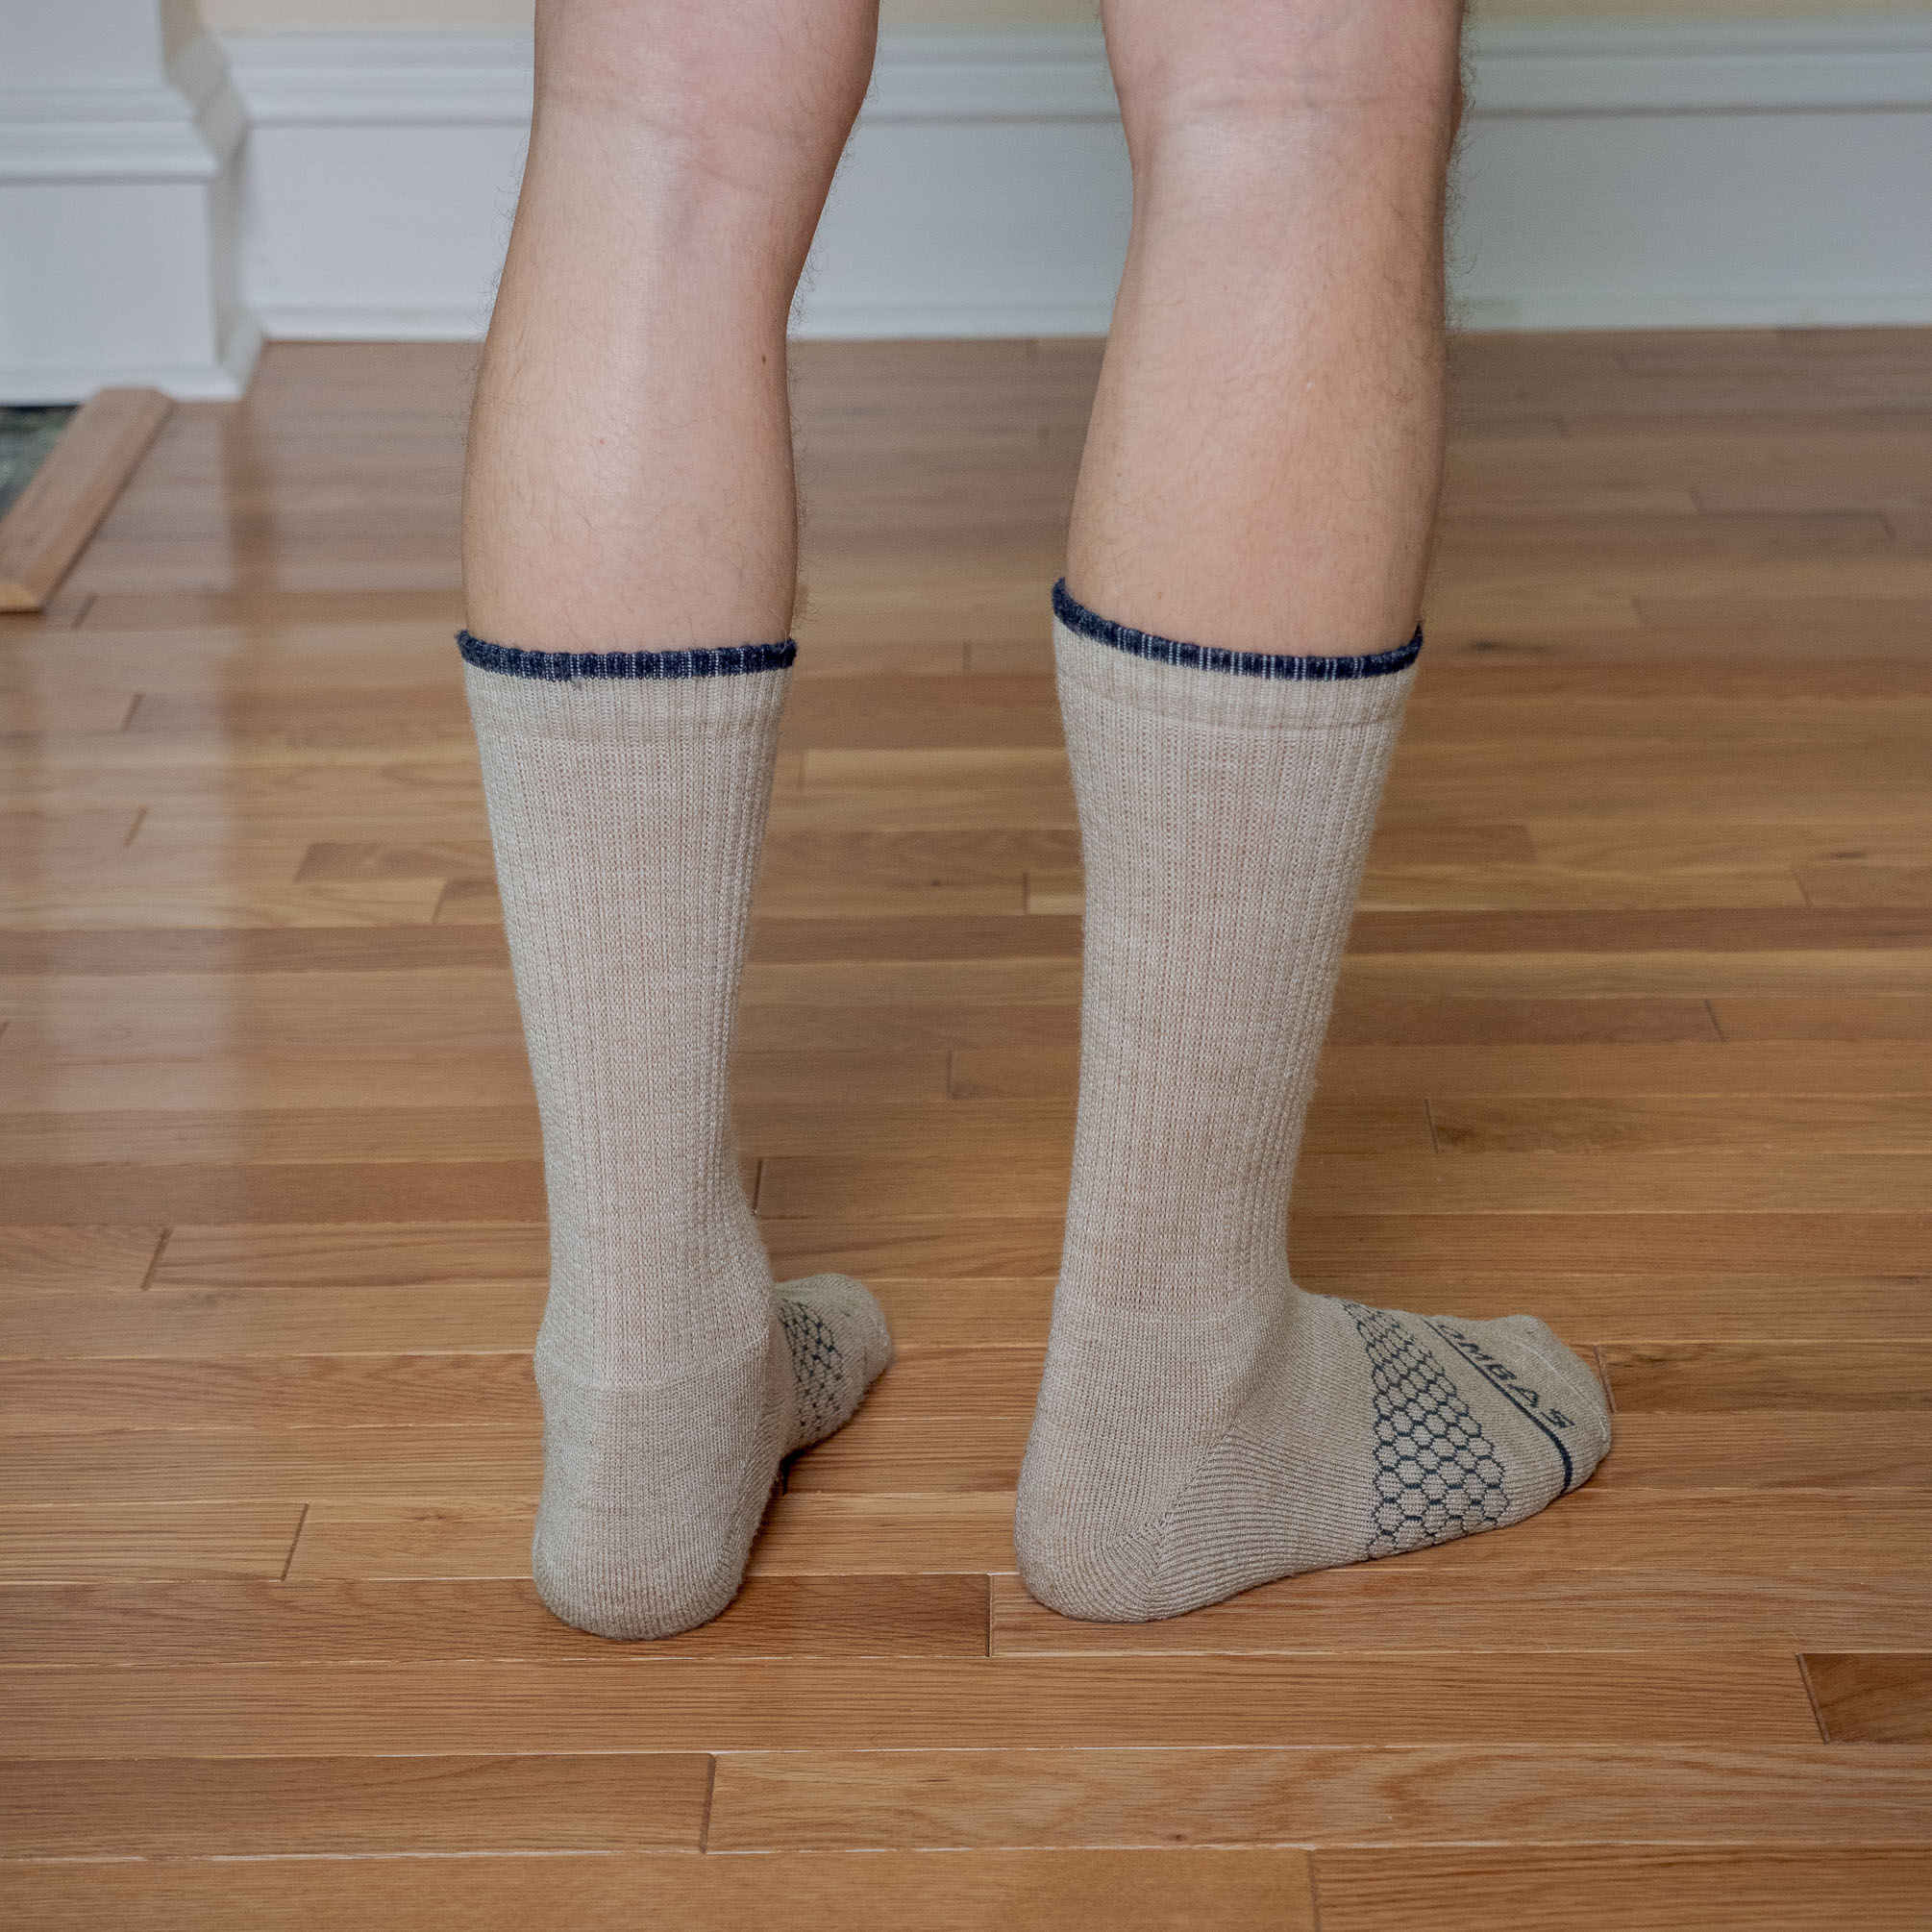 1980's Child - remember scrunch socks, and wearing two at